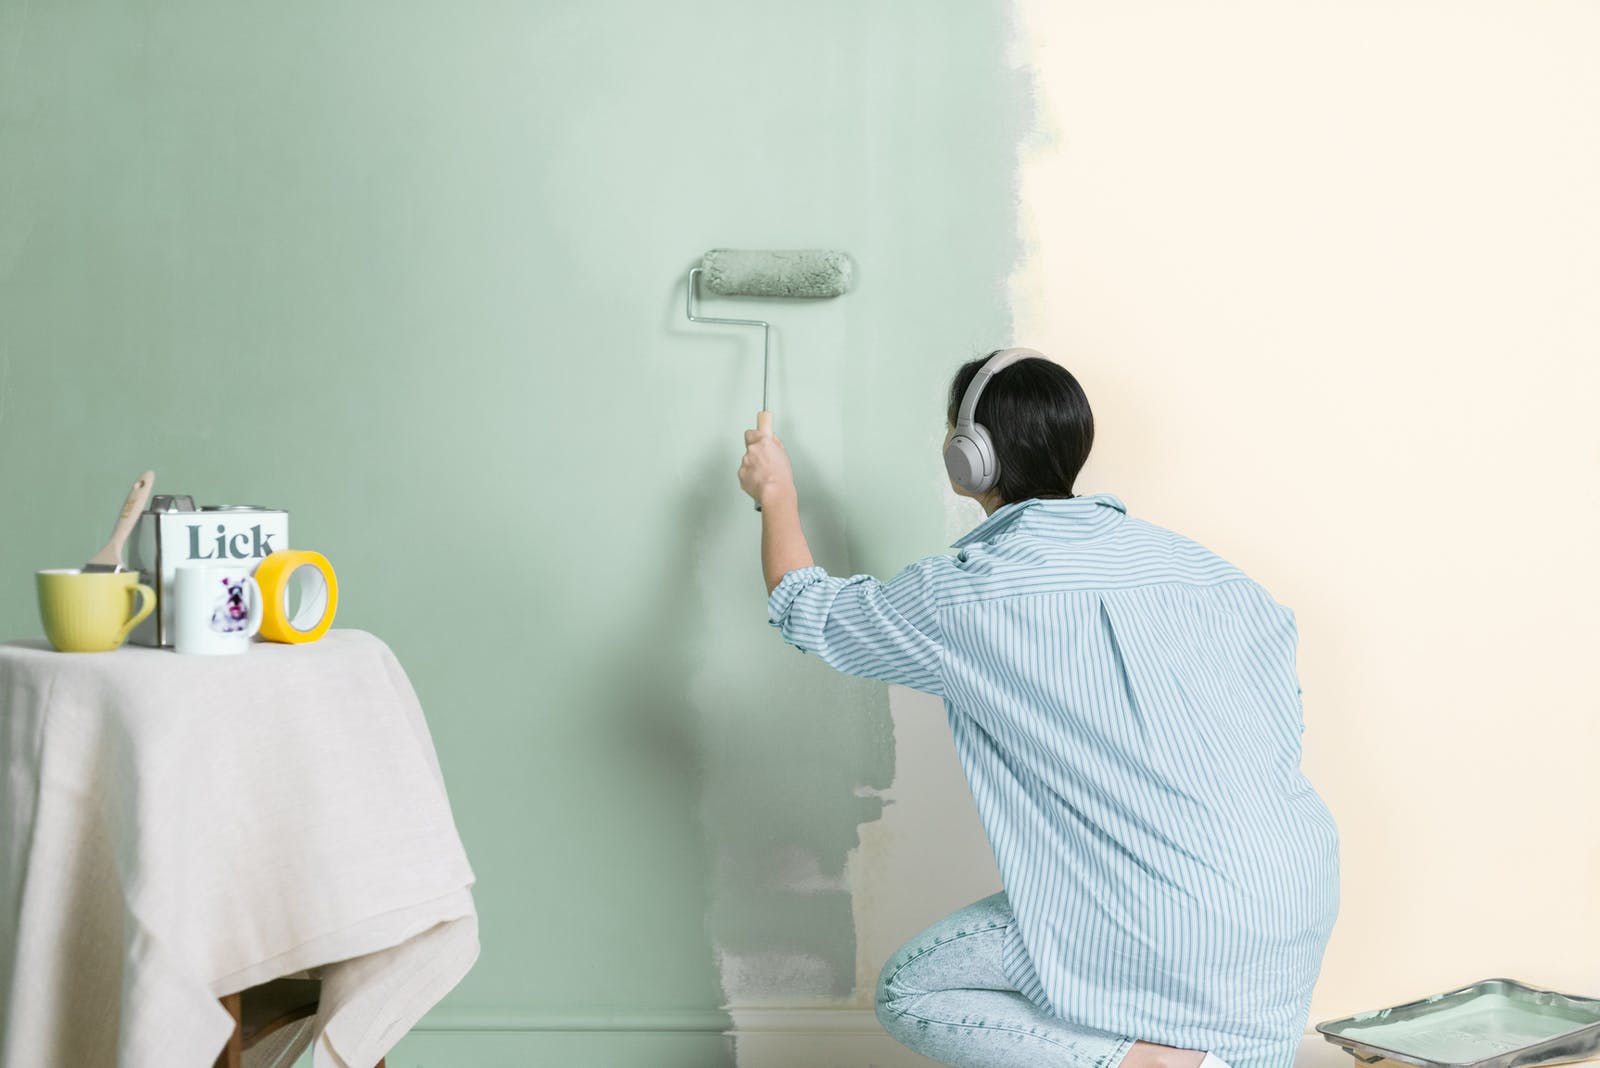 How To Prepare Walls For Painting: 5 Easy Steps To Follow